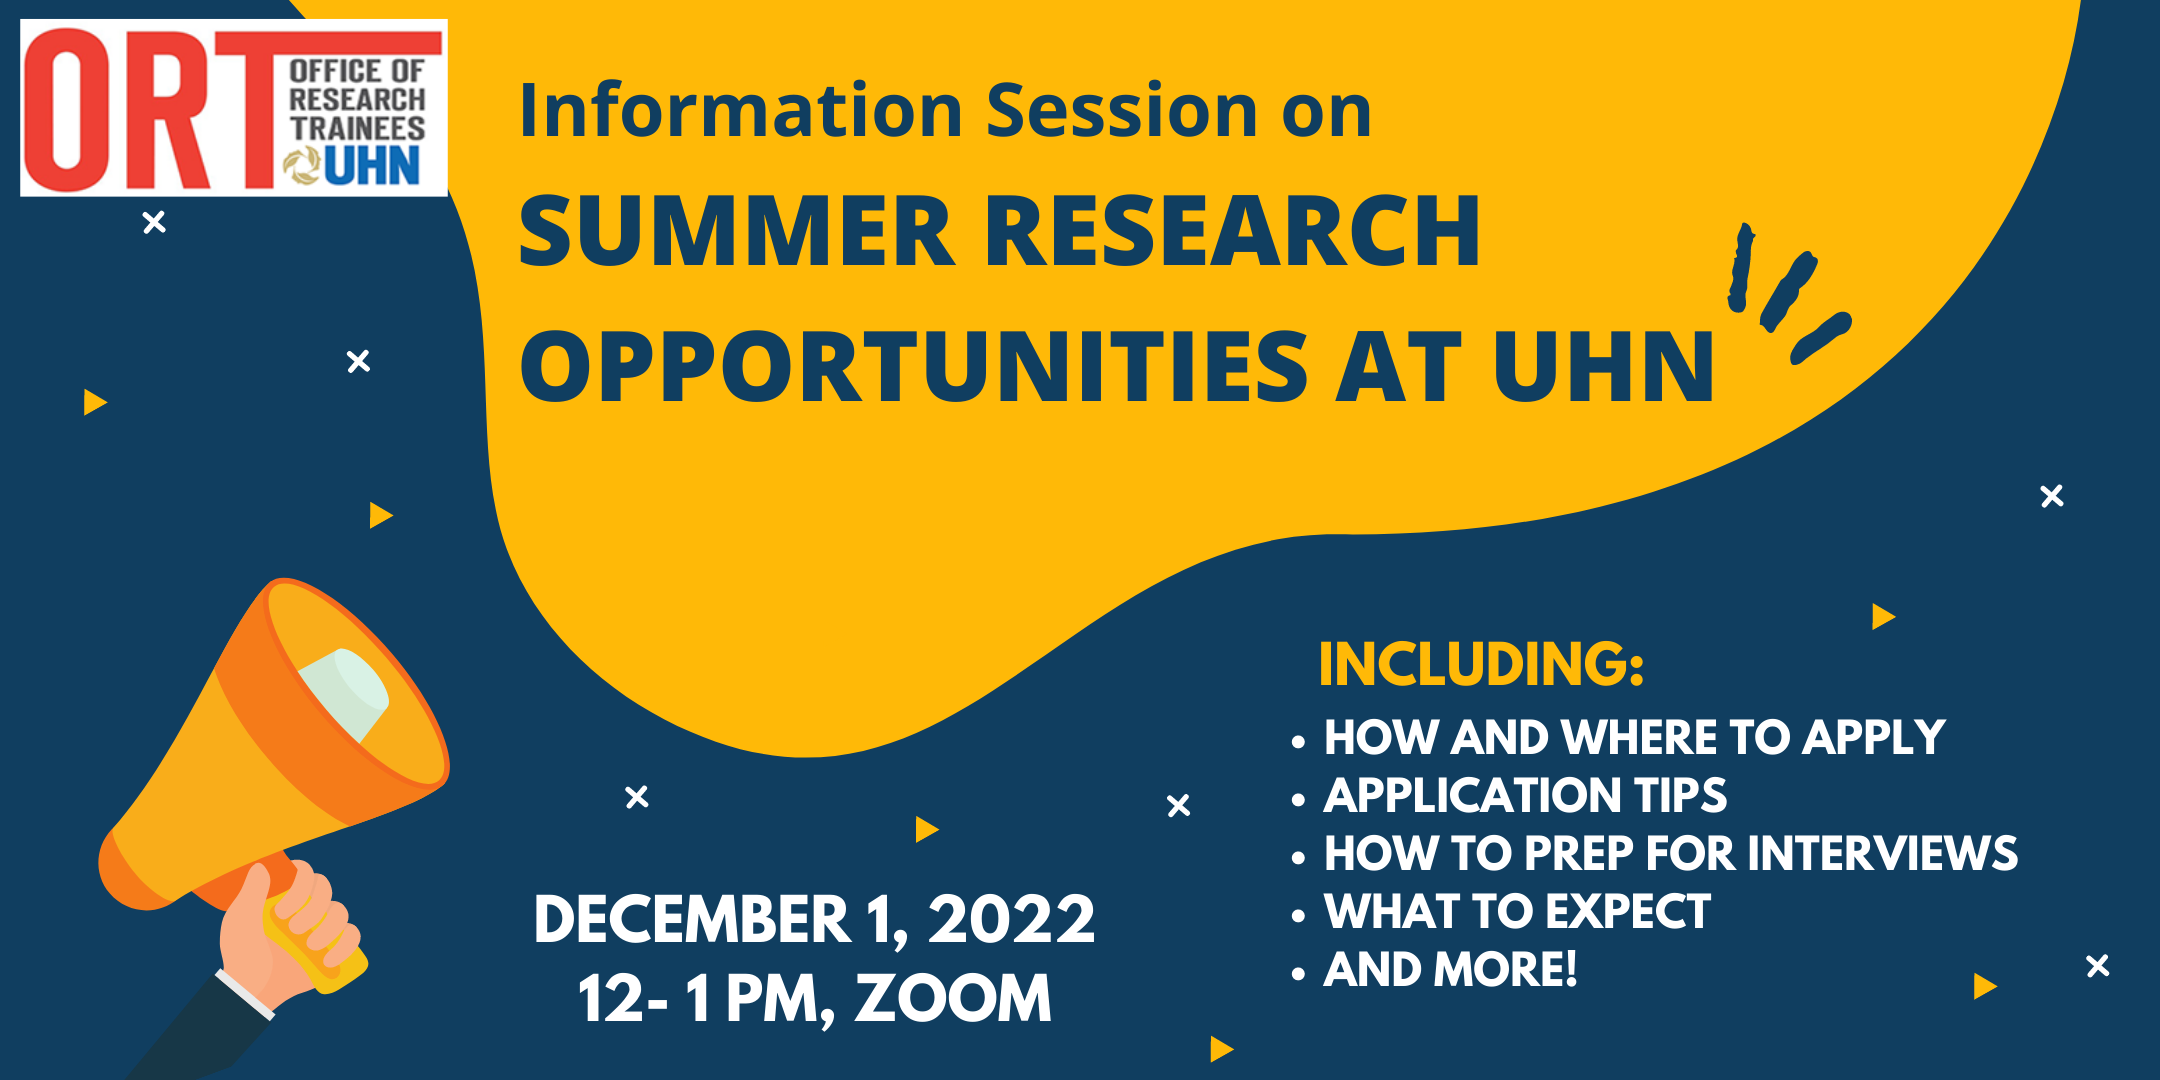 Navy blue and yellow poster. Information session on Summer Research Opportunities at UHN. Includes: how and where to apply, application tips, how to prepare for interviews, what to expect and more. December 1, 2022. 12-1 pm, Zoom.